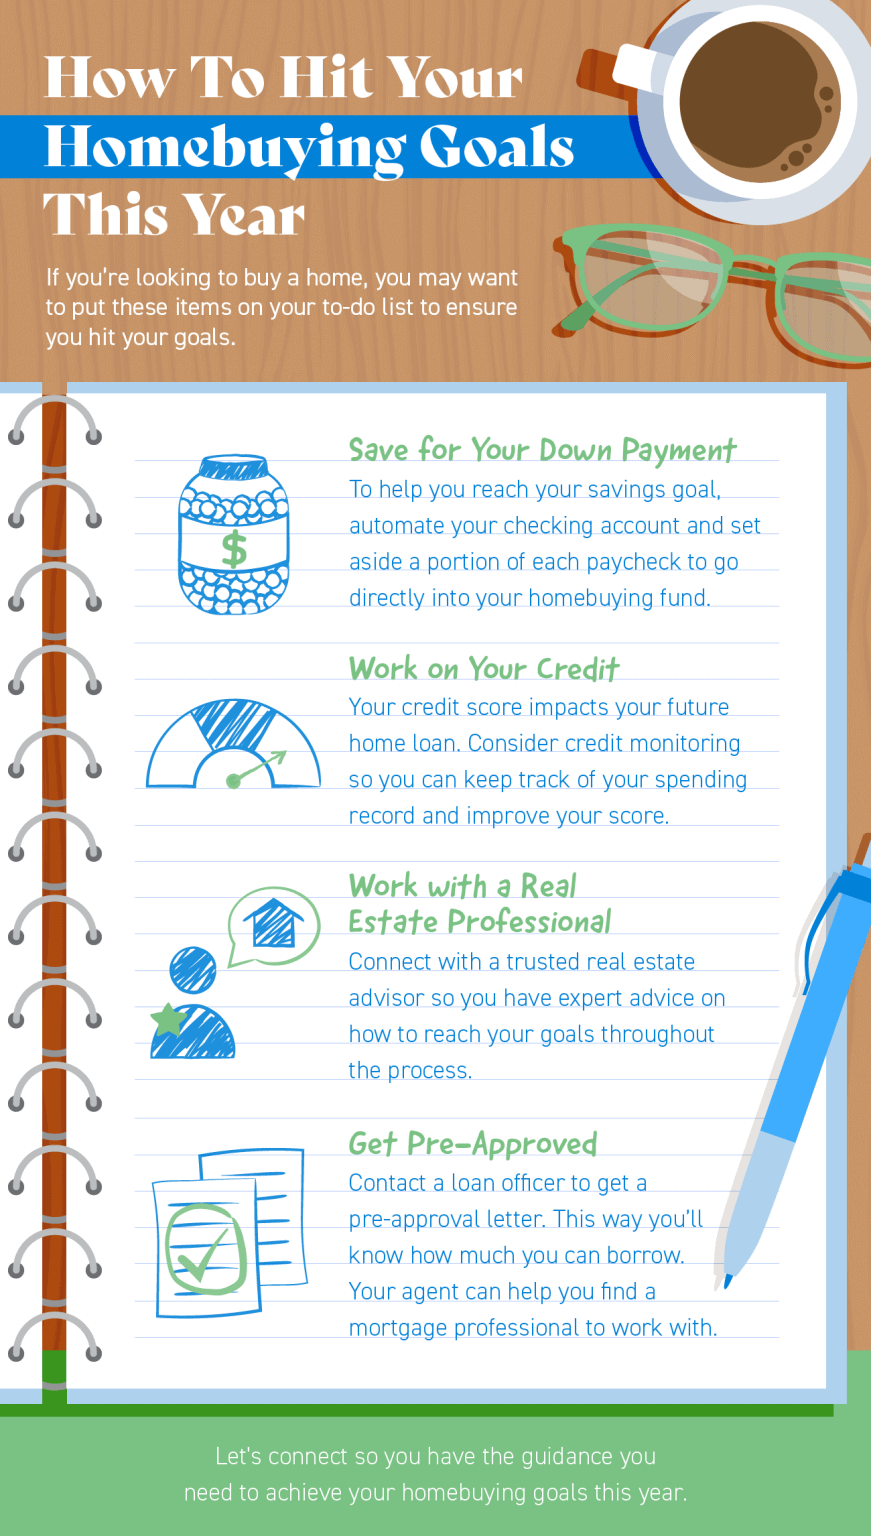 How To Hit Your Homebuying Goals This Year [INFOGRAPHIC]